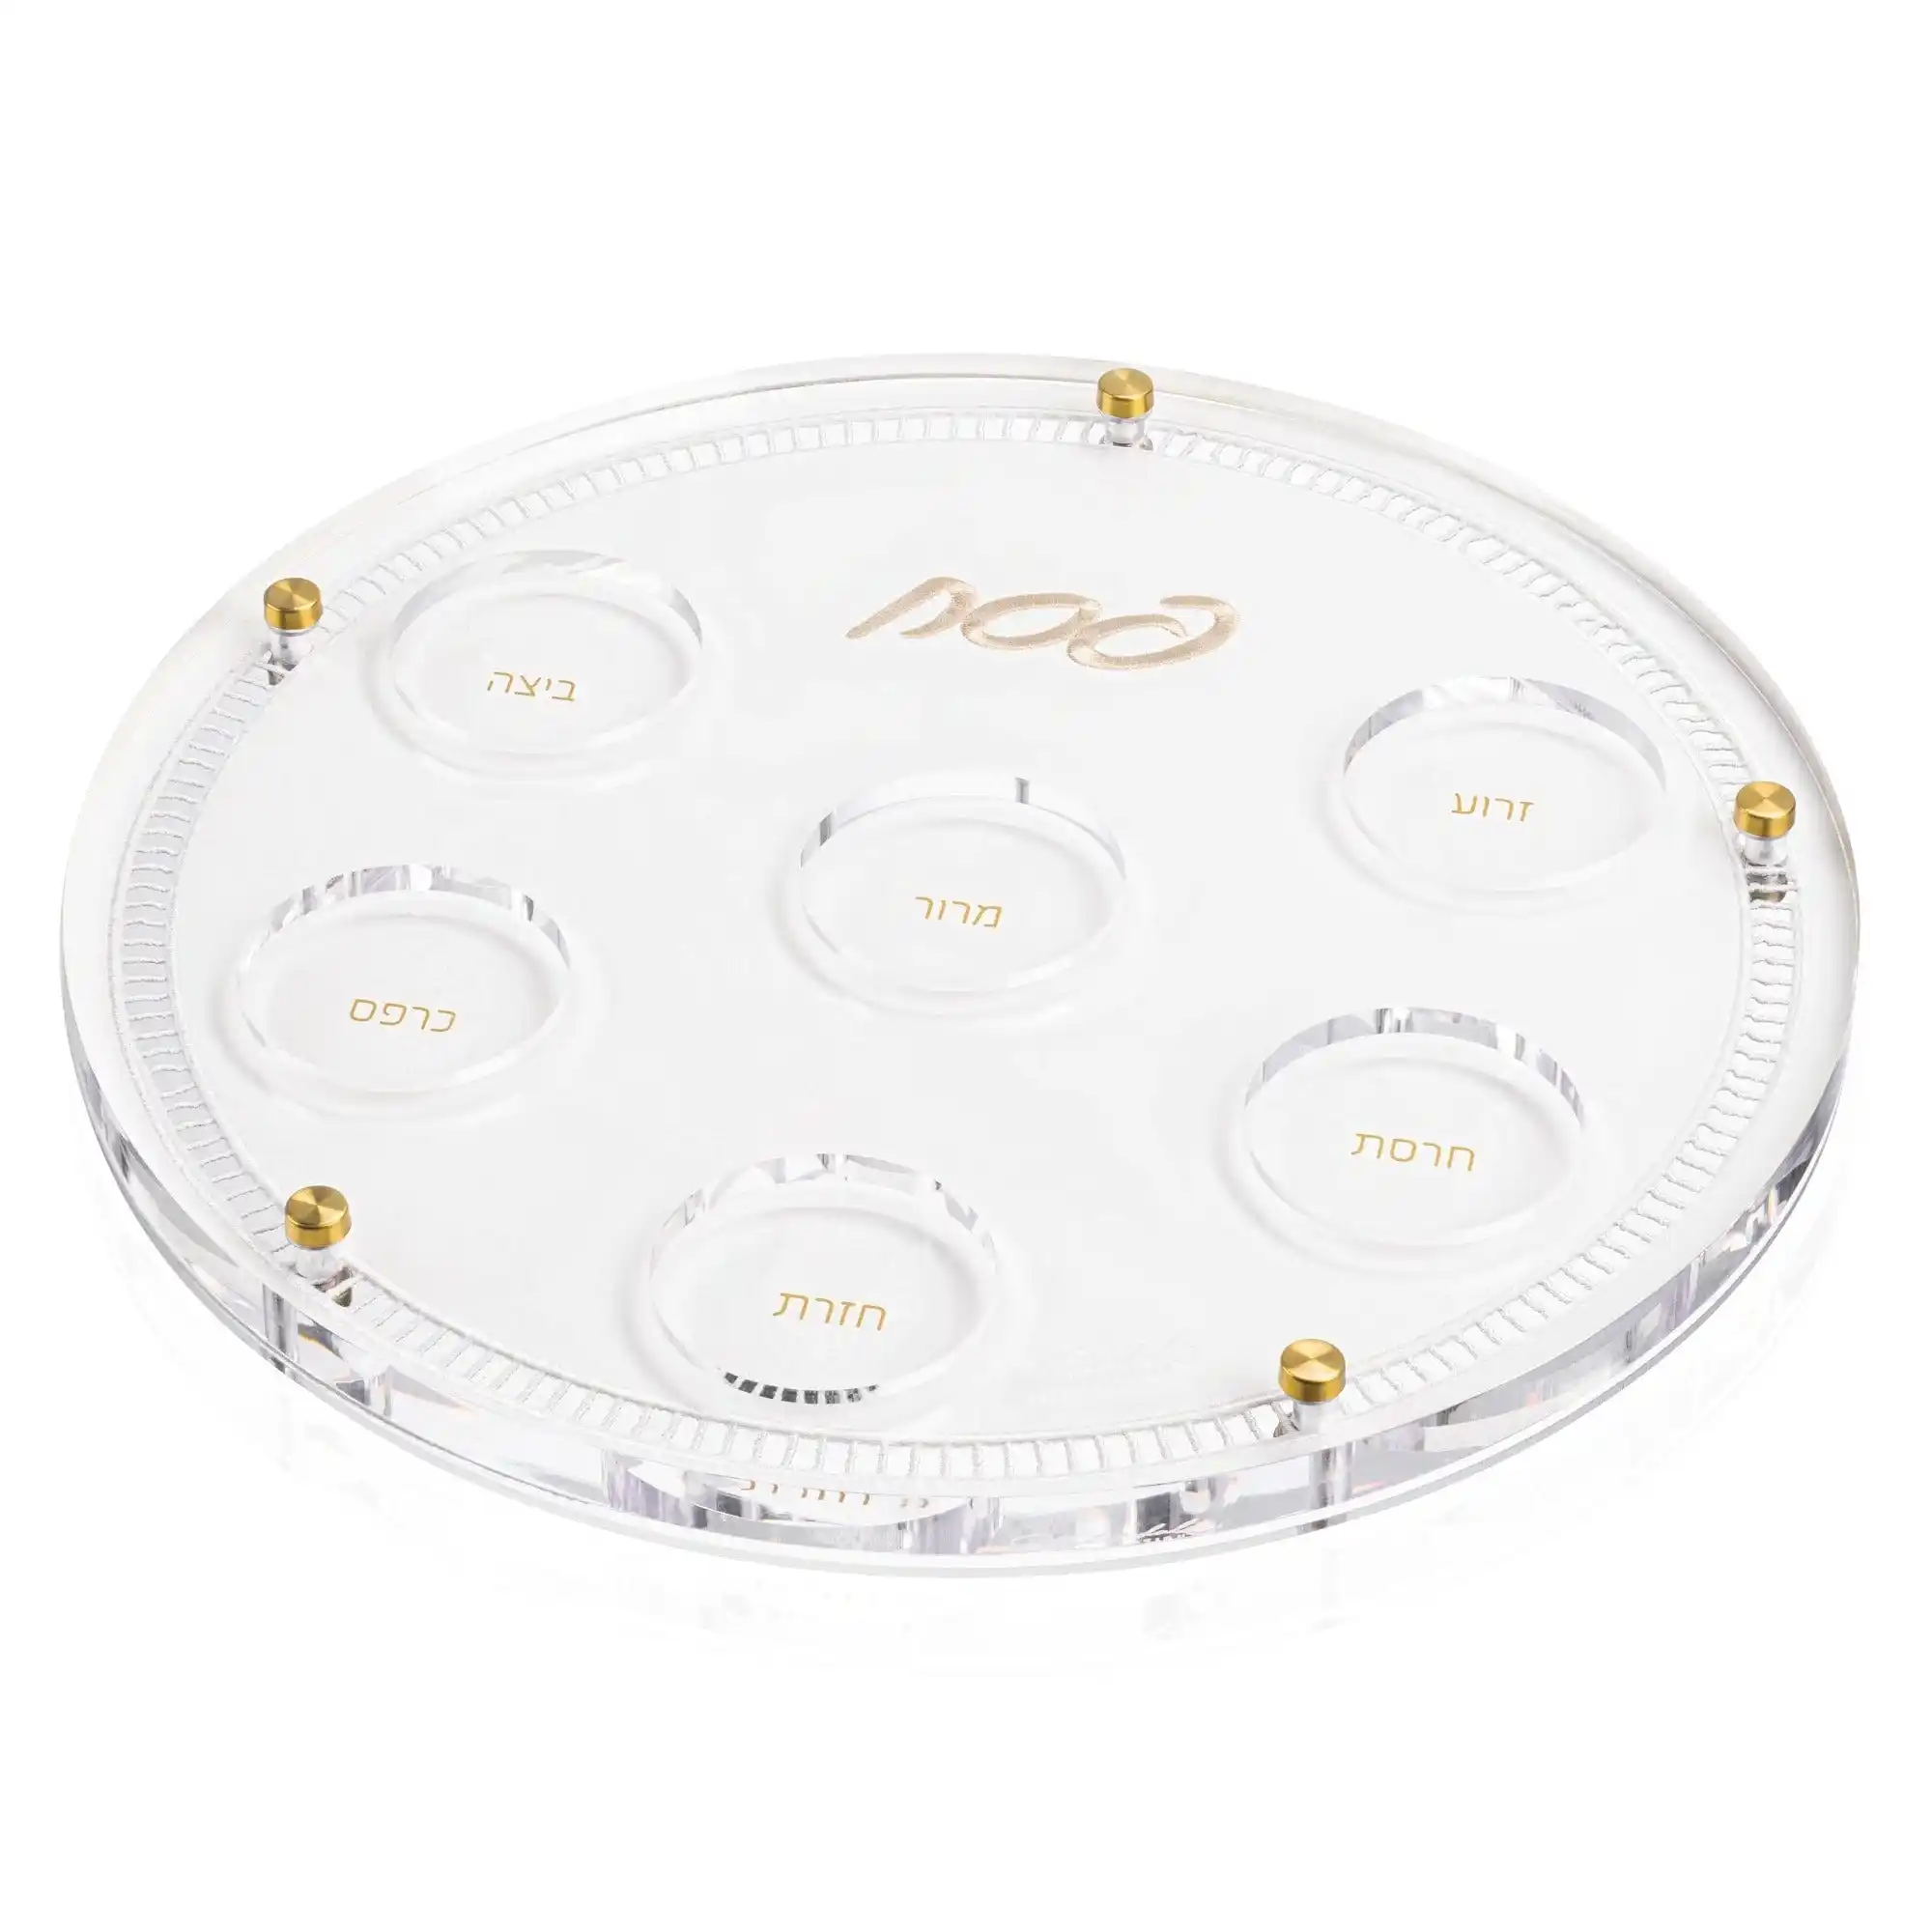 13.75 Round" Judaica Six Wells Hebrew Word Seder Tray Pesach Clear Lucite Passover Seder Plates with Your Own Logo